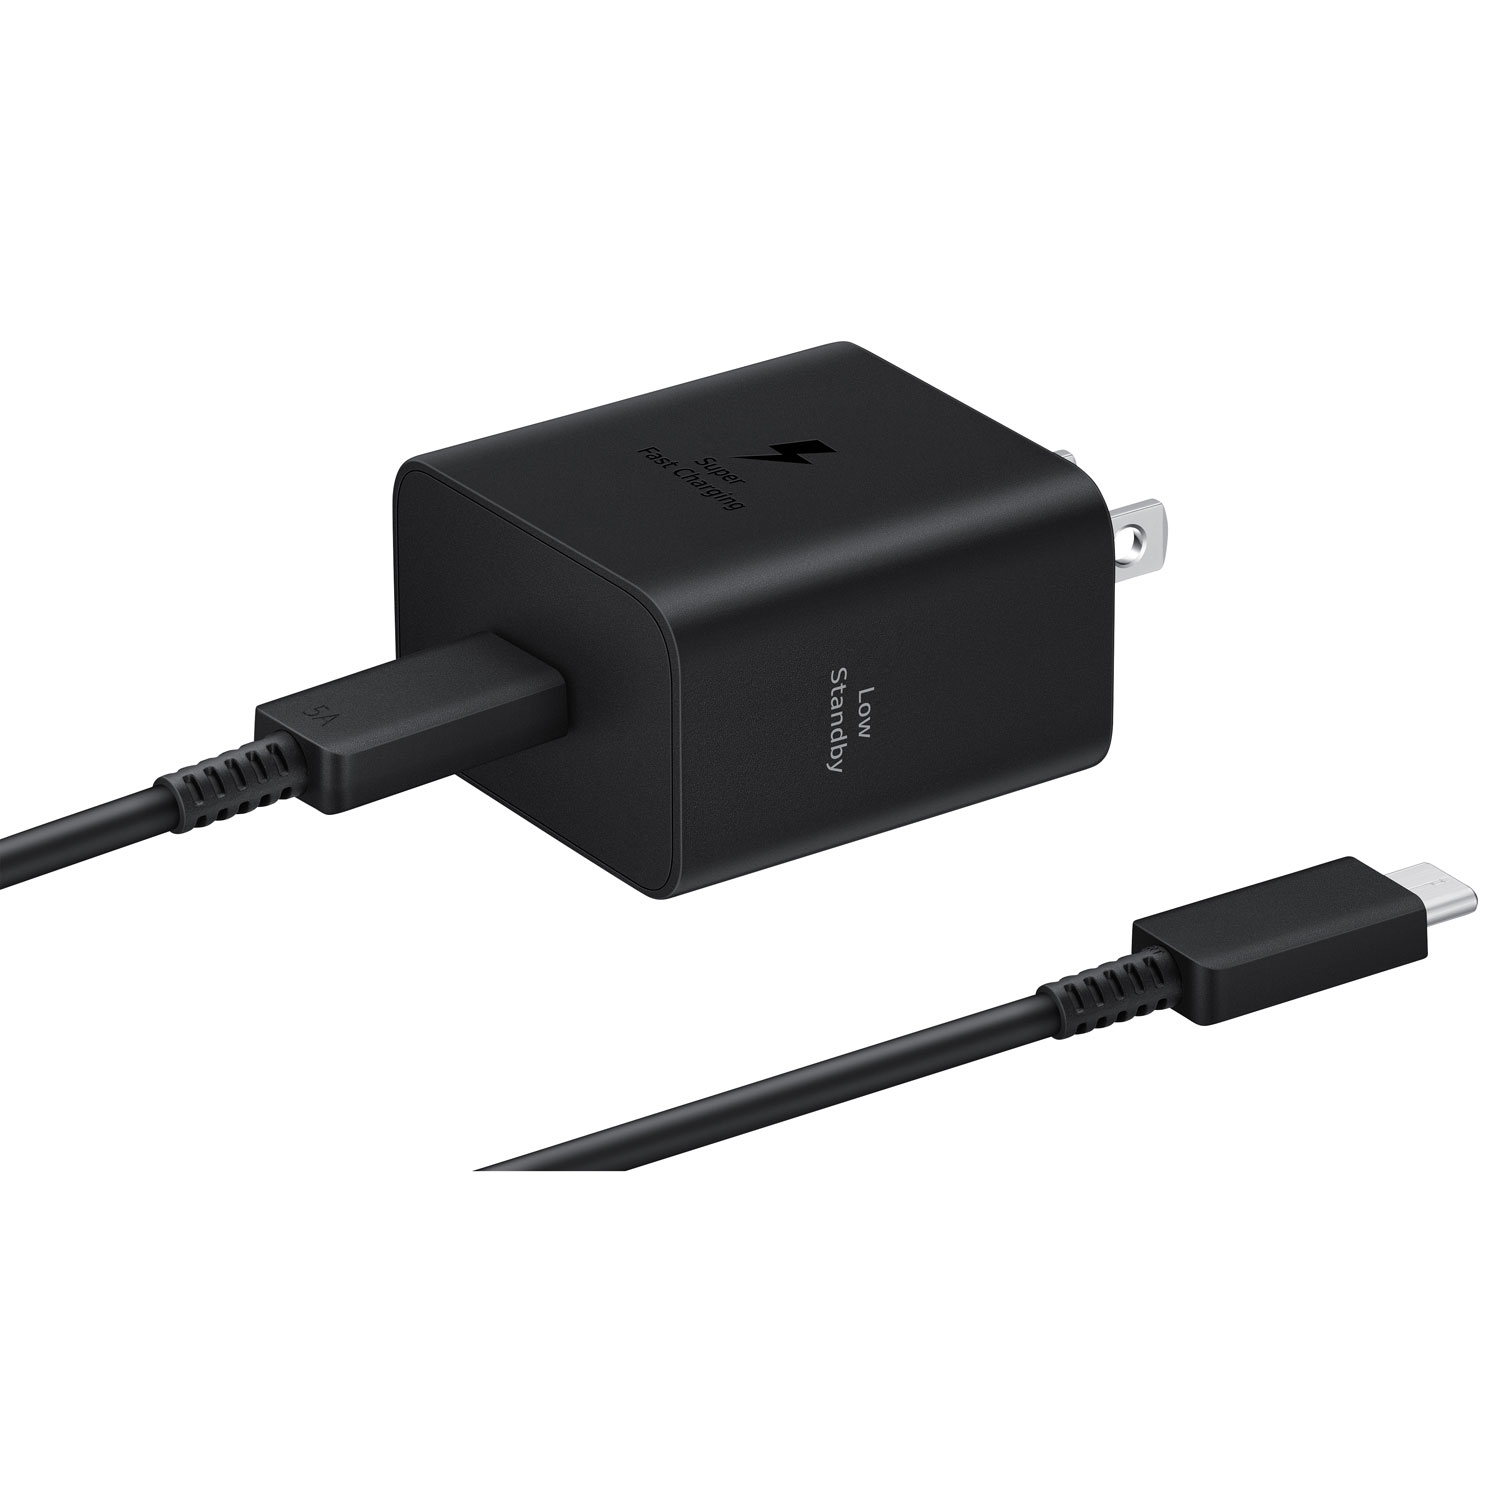 Samsung Super Fast Charging 45W USB-C Wall Charger with 5ft. USB-C Cable - Black